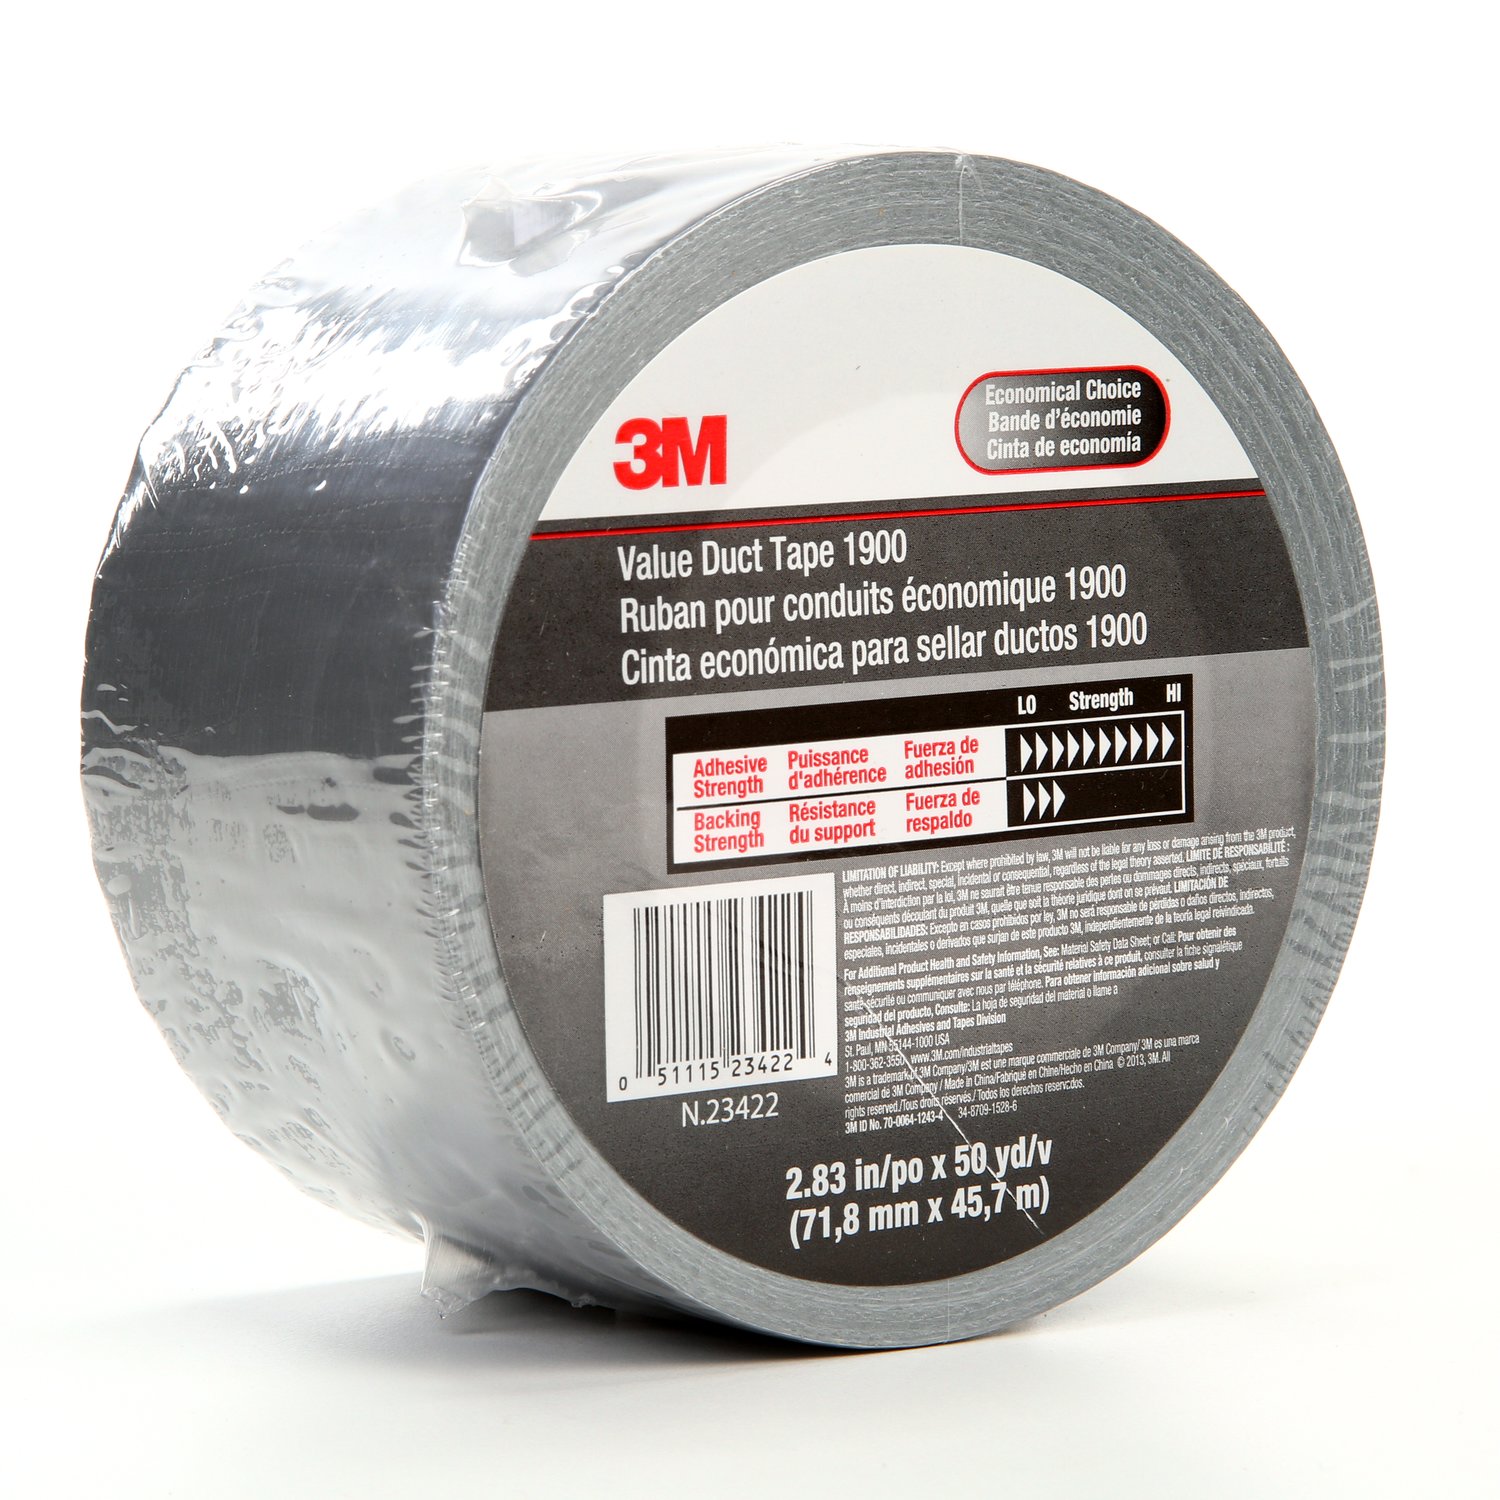 7000124256 - 3M Value Duct Tape 1900, Silver, 2.83 in x 50 yd, 5.8 mil, 12/Case,
Individually Wrapped Conveniently Packaged